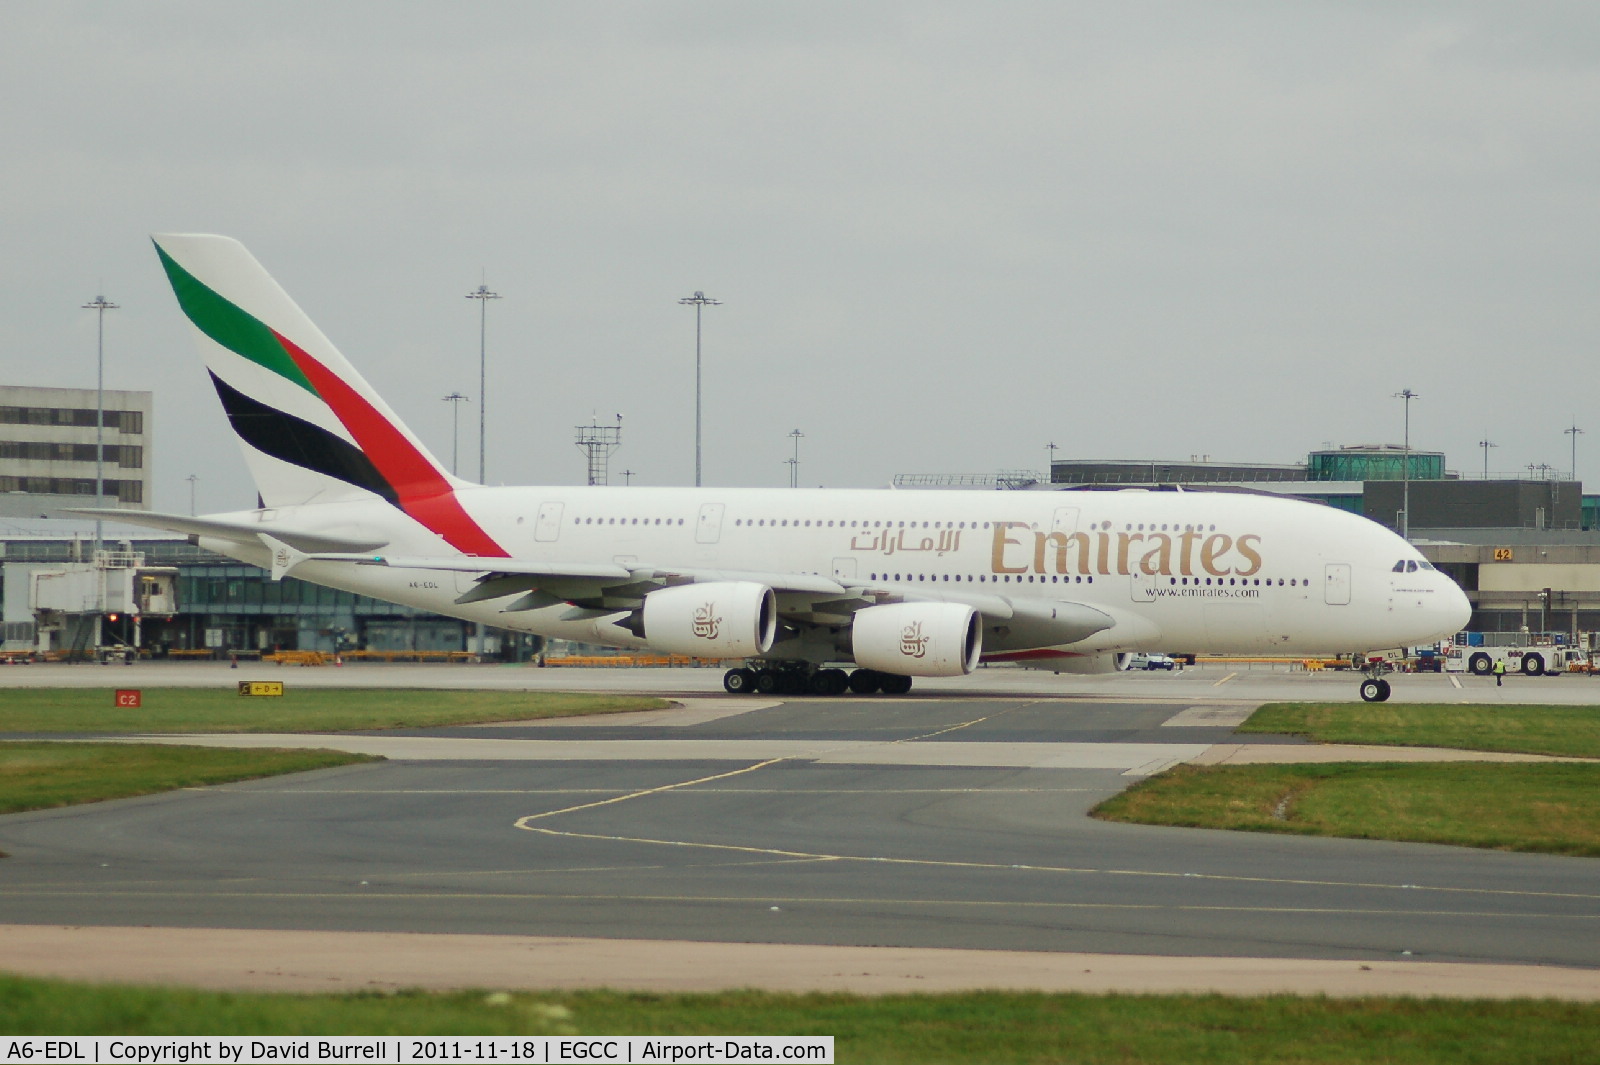 A6-EDL, 2010 Airbus A380-861 C/N 046, Emirates Airbus A380 taxiing Manchester Airport.